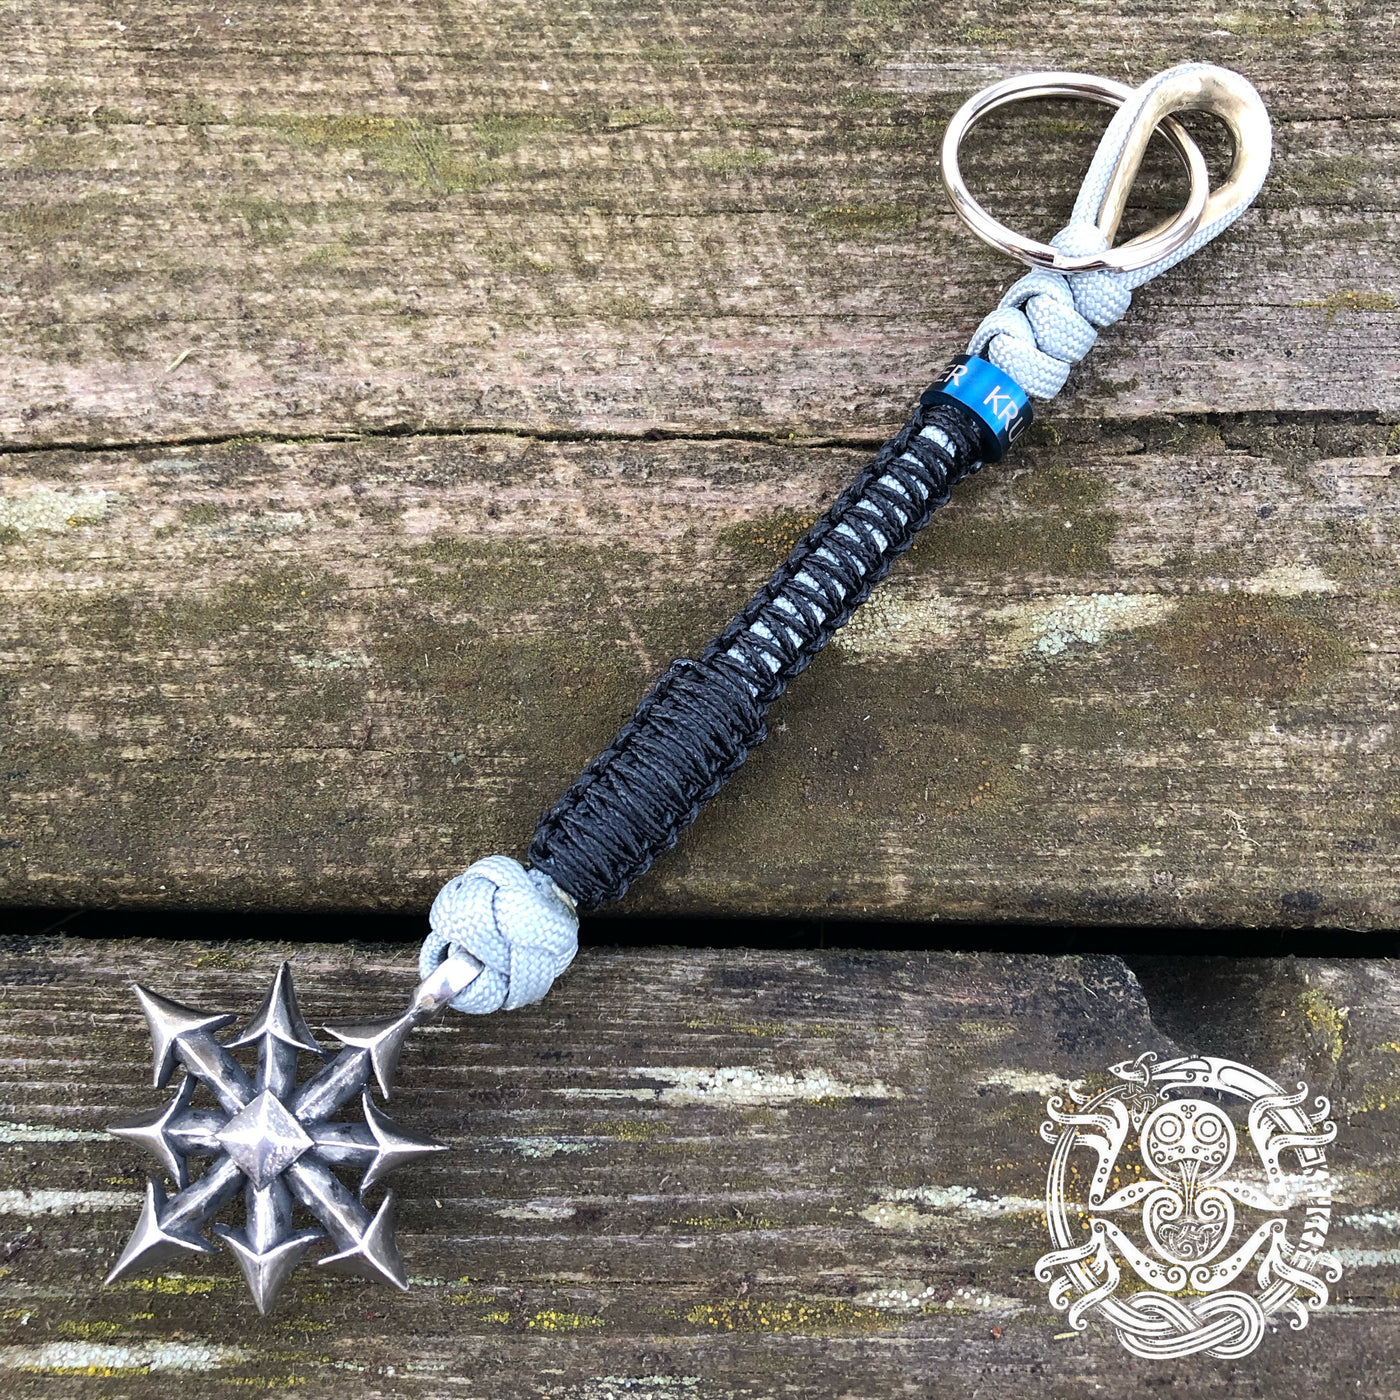 Chaos star keychain and necklace